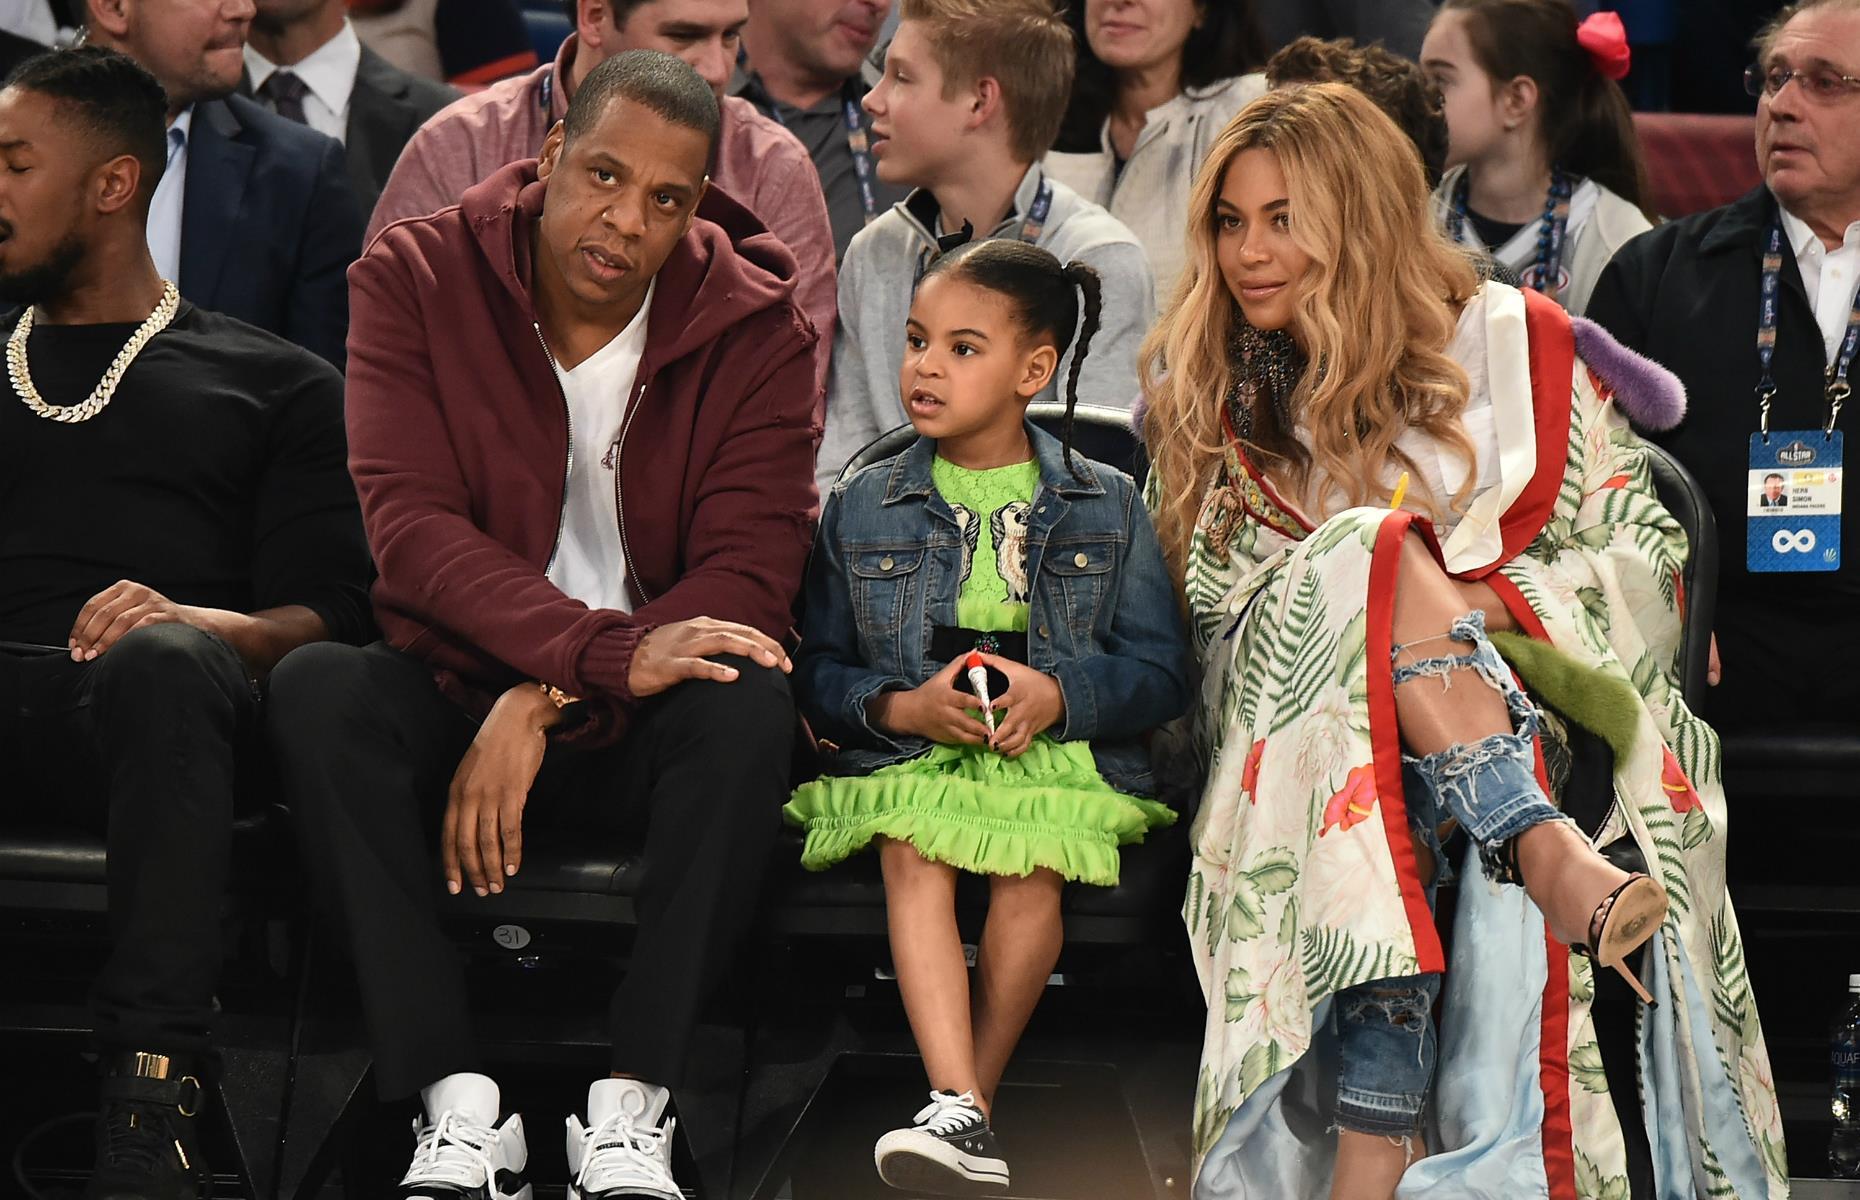 The names Blue Ivy, Rumi and Sir